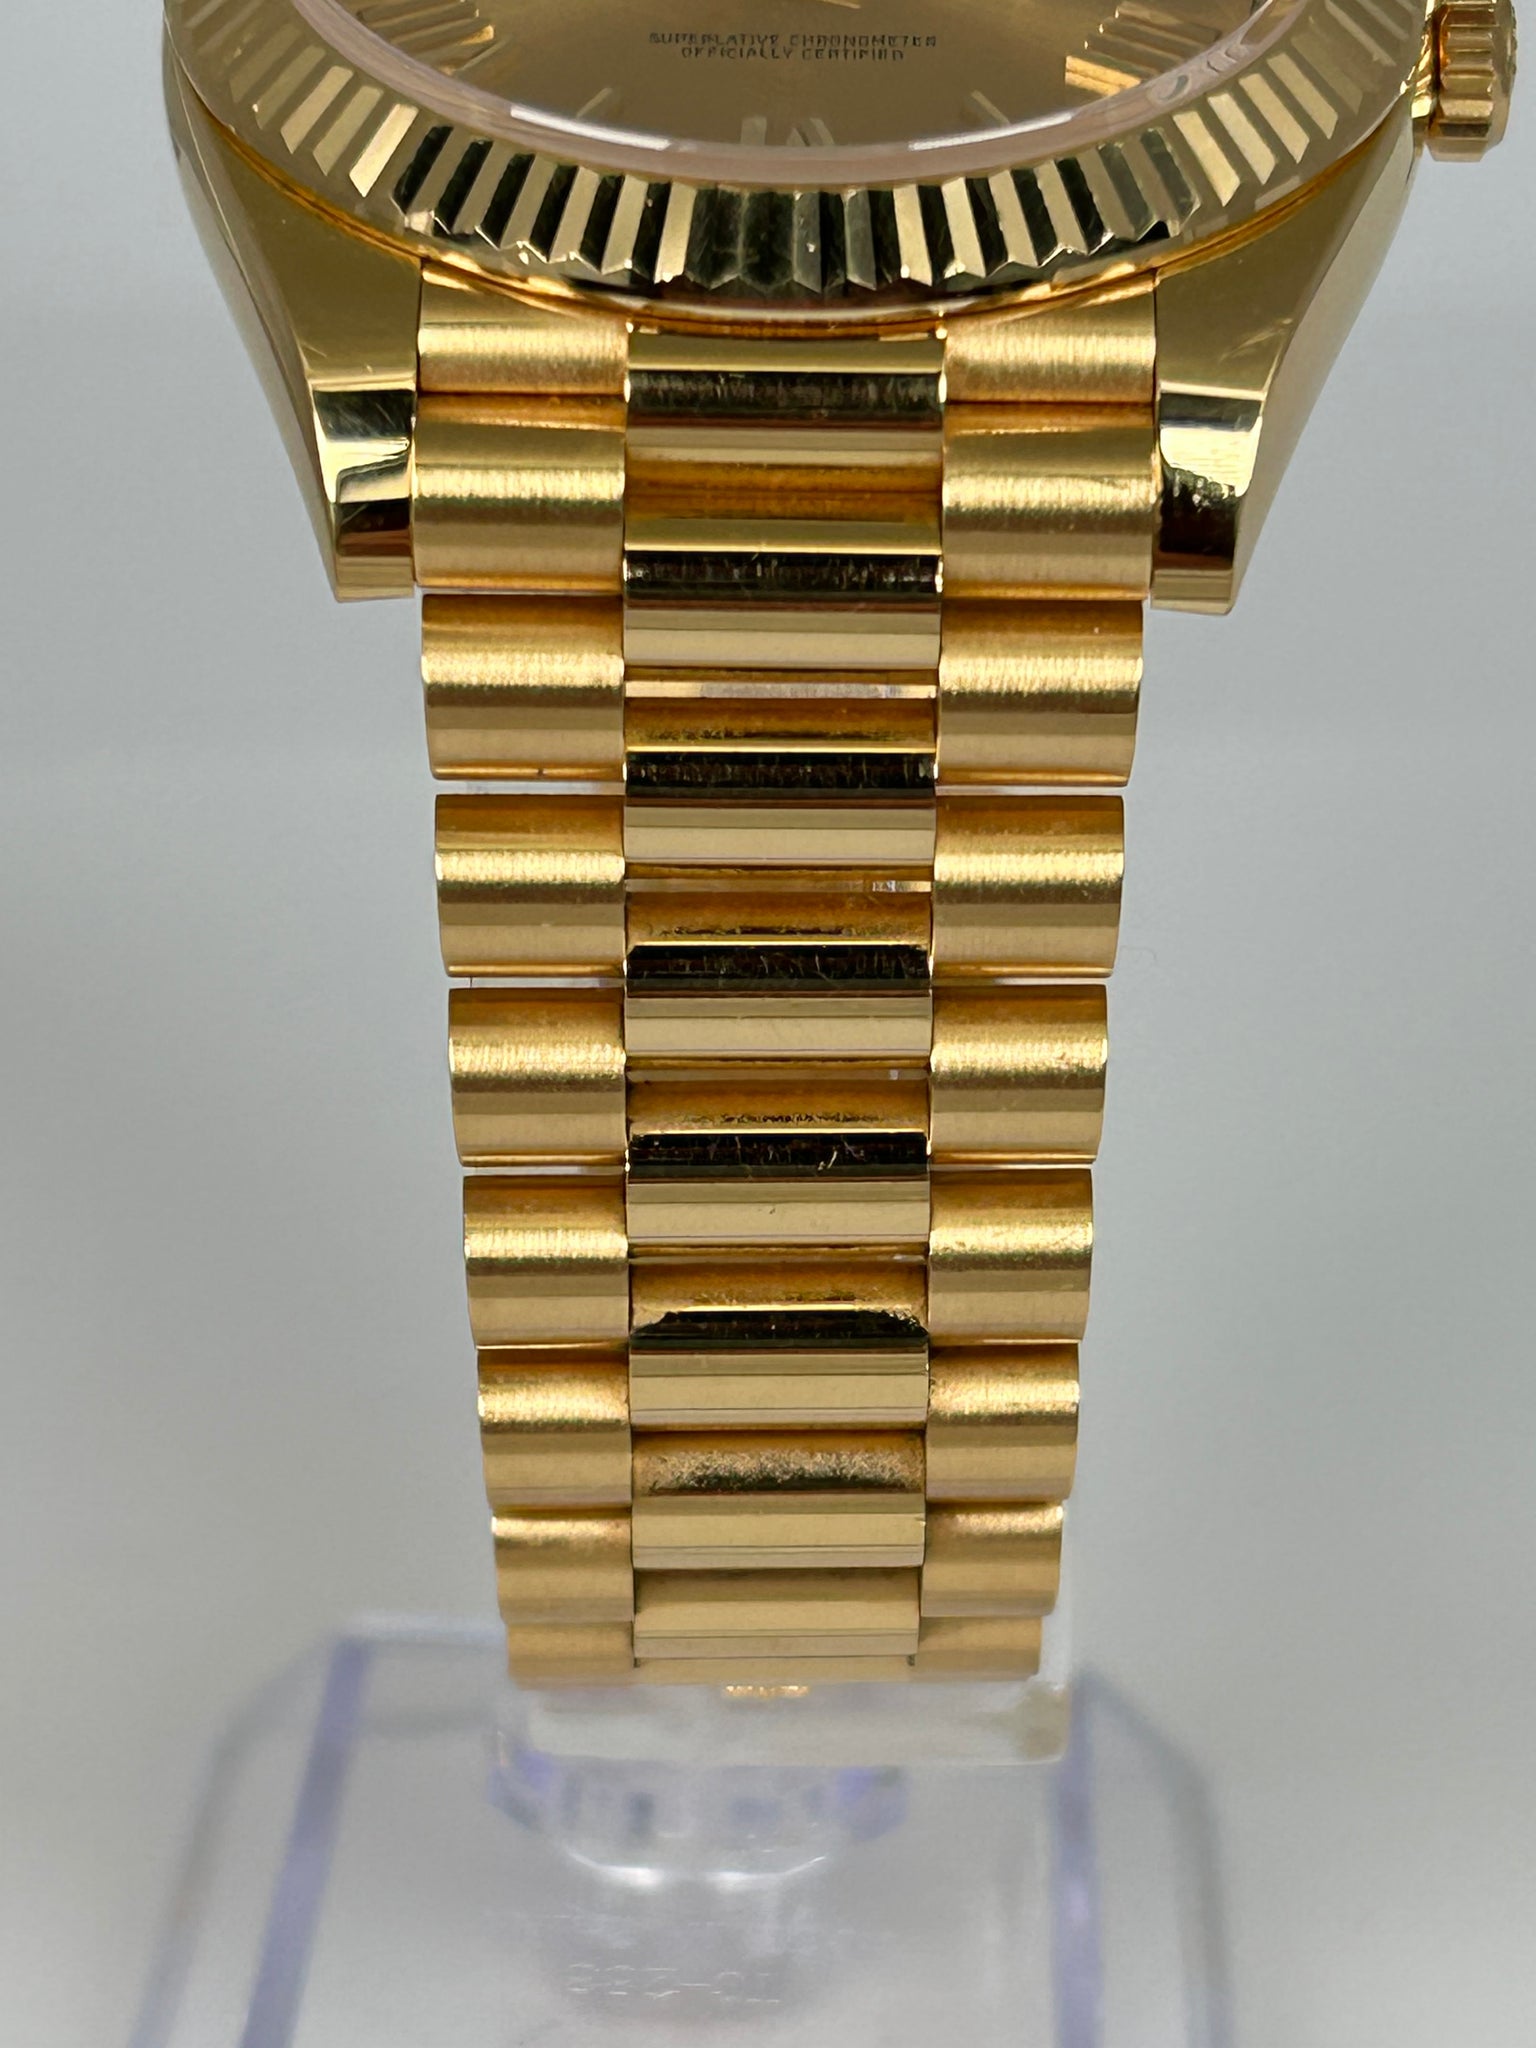 Rolex Day-Date 40 Champagne Roman Yellow Gold 228238